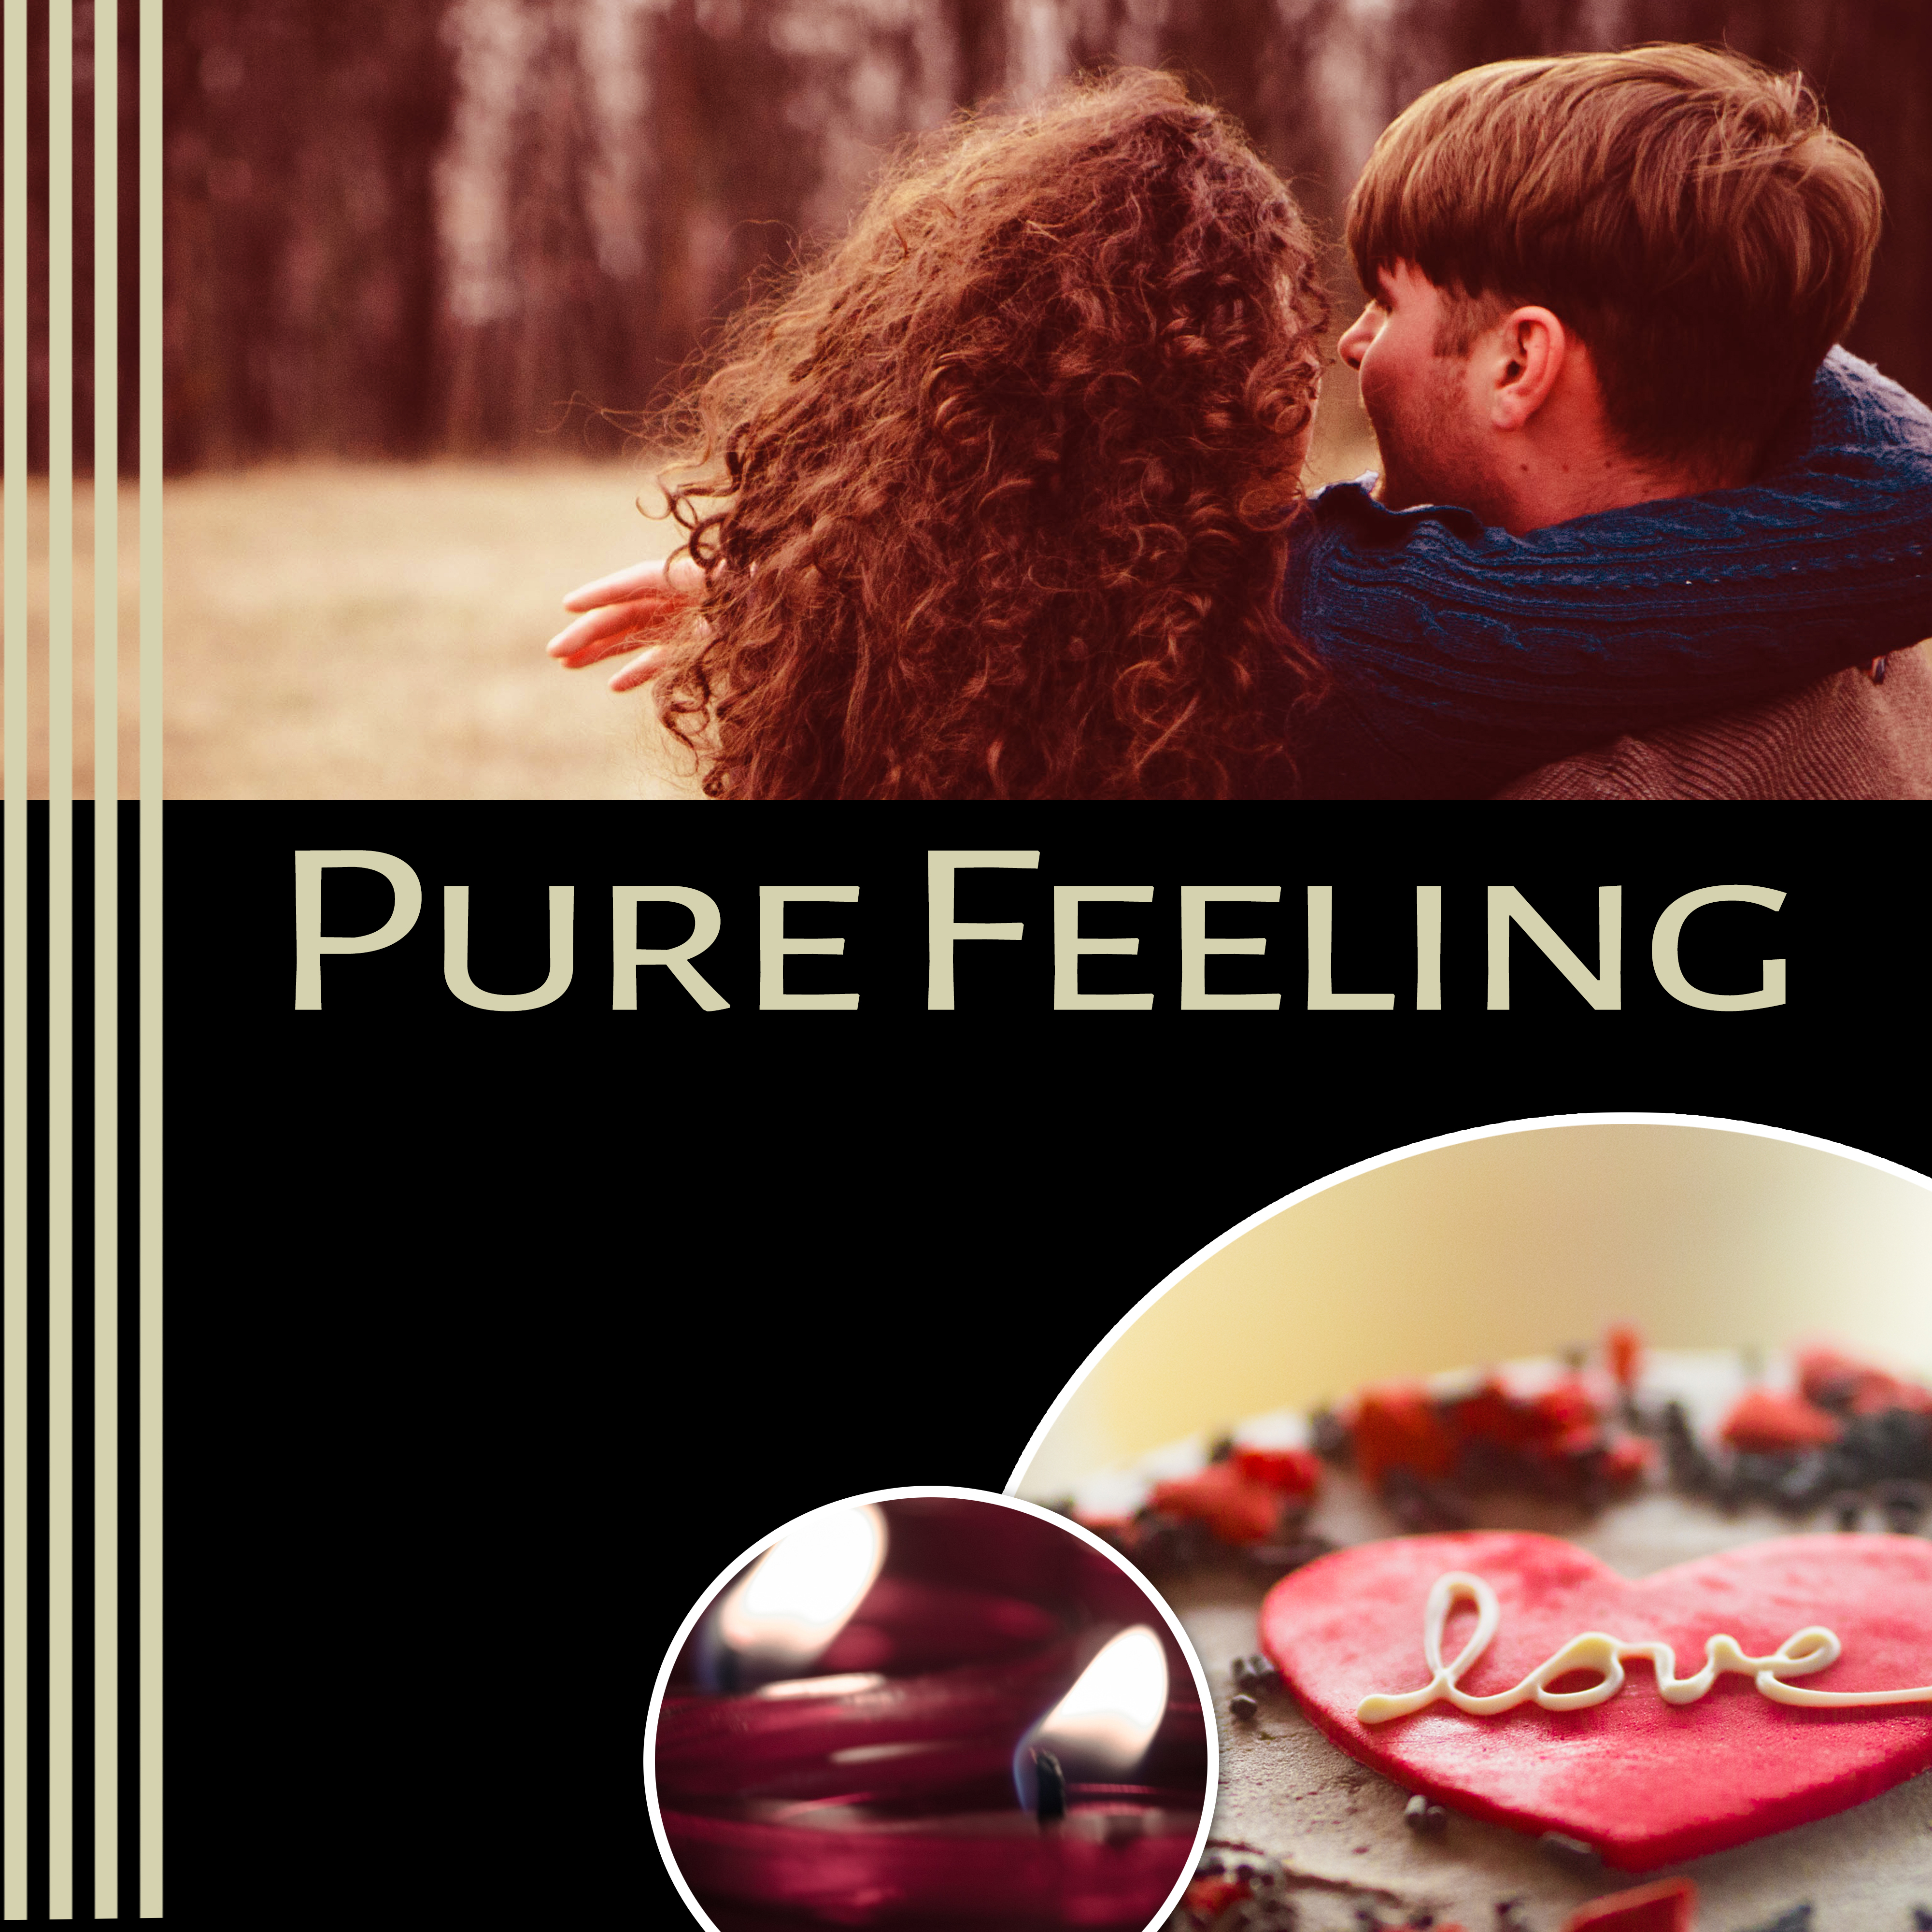 Pure Feeling  Sensual Jazz Music, True Love, Romantic Date, Relaxation Sounds for Lovers, Sensitive Gestures, Smooth Jazz